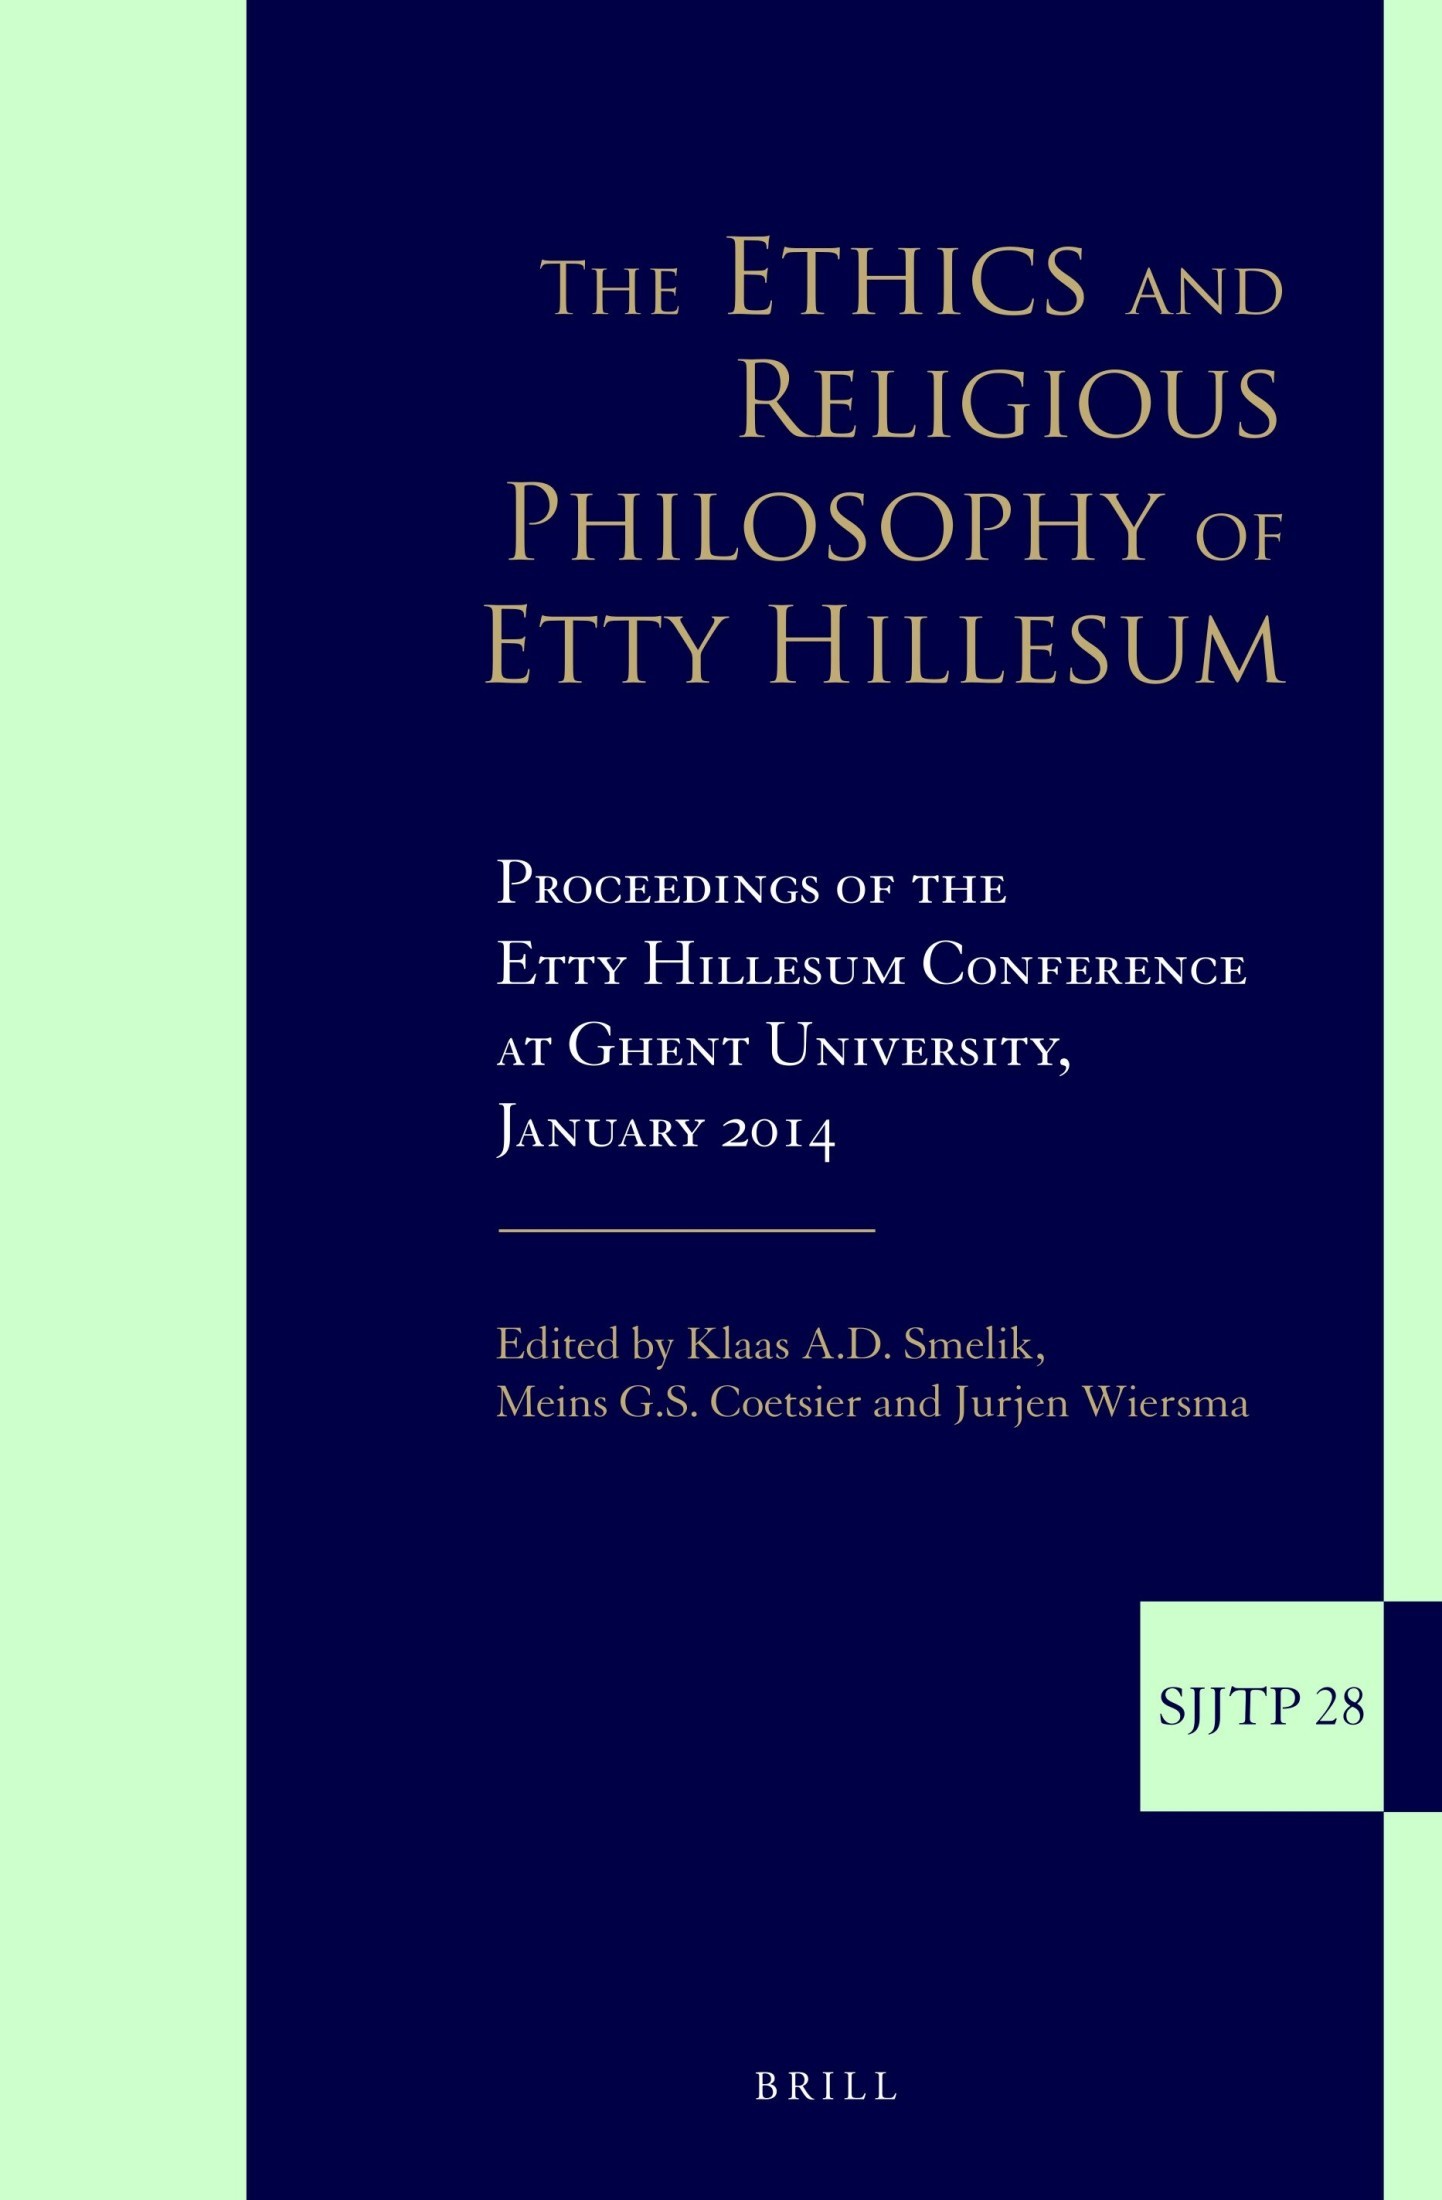 The Ethics and Religious Philosophy of Etty Hillesum: Proceedings of the Etty Hillesum Conference at Ghent University, January 2014